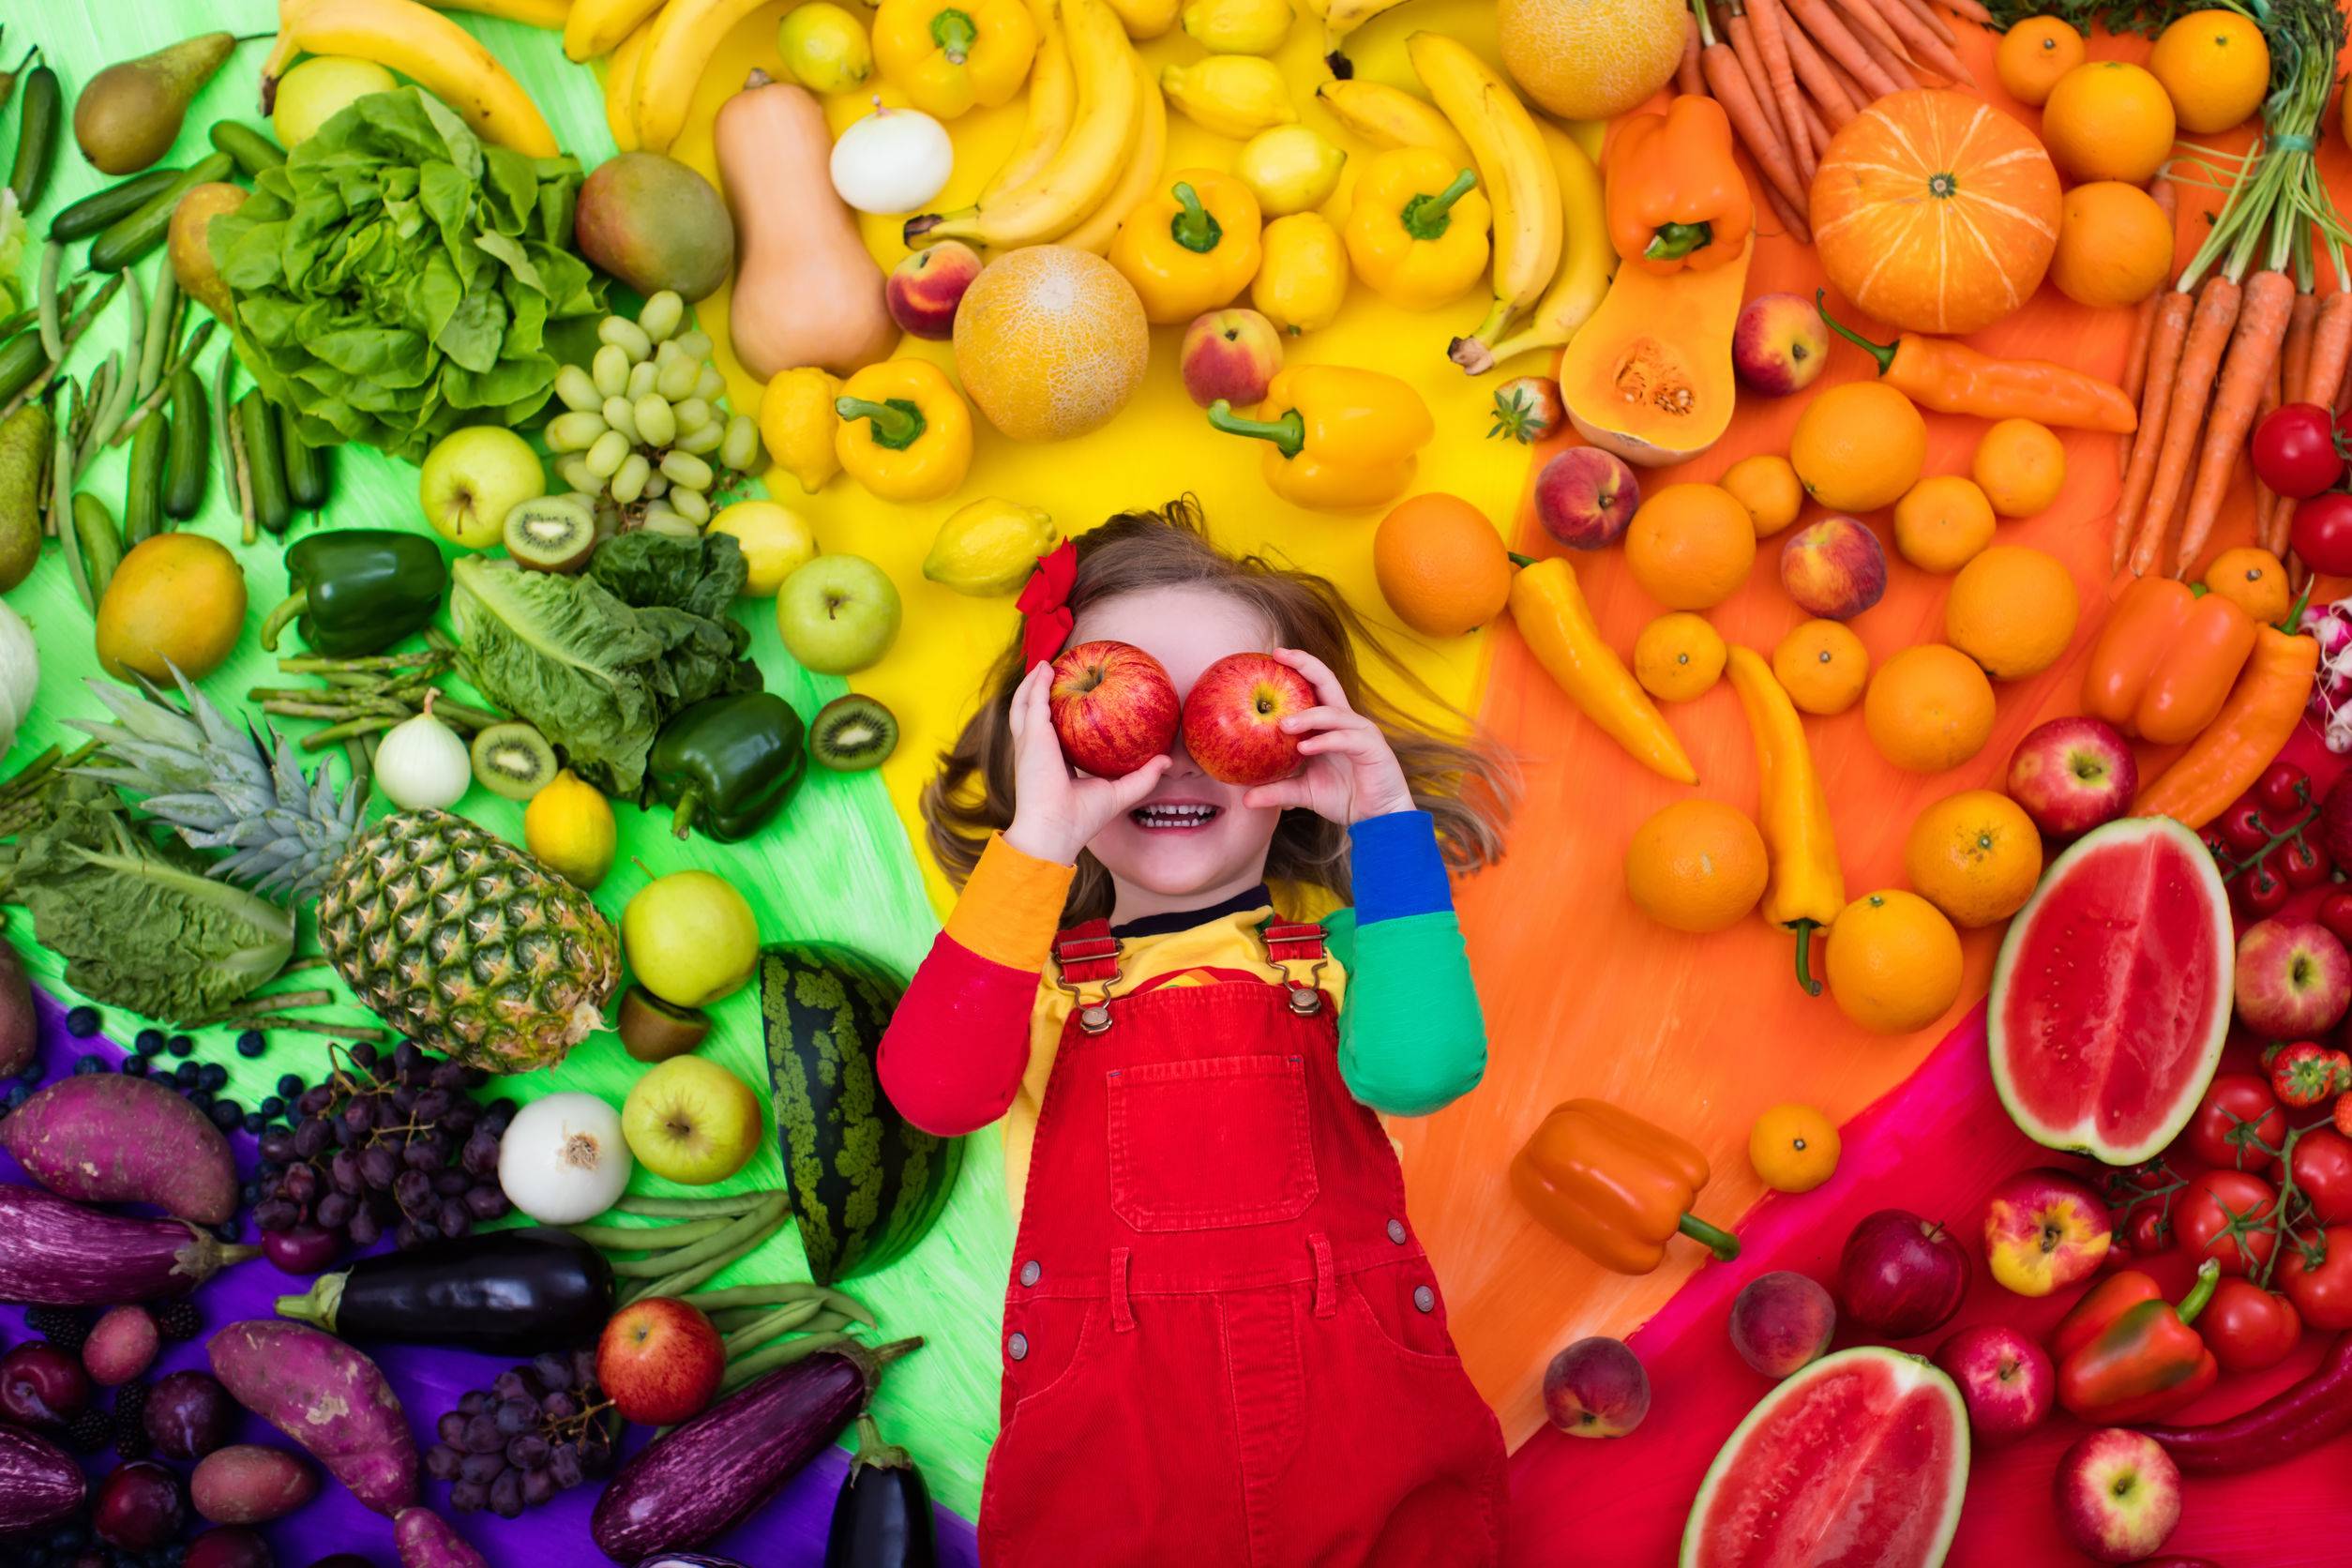 healthy food pictures for kids